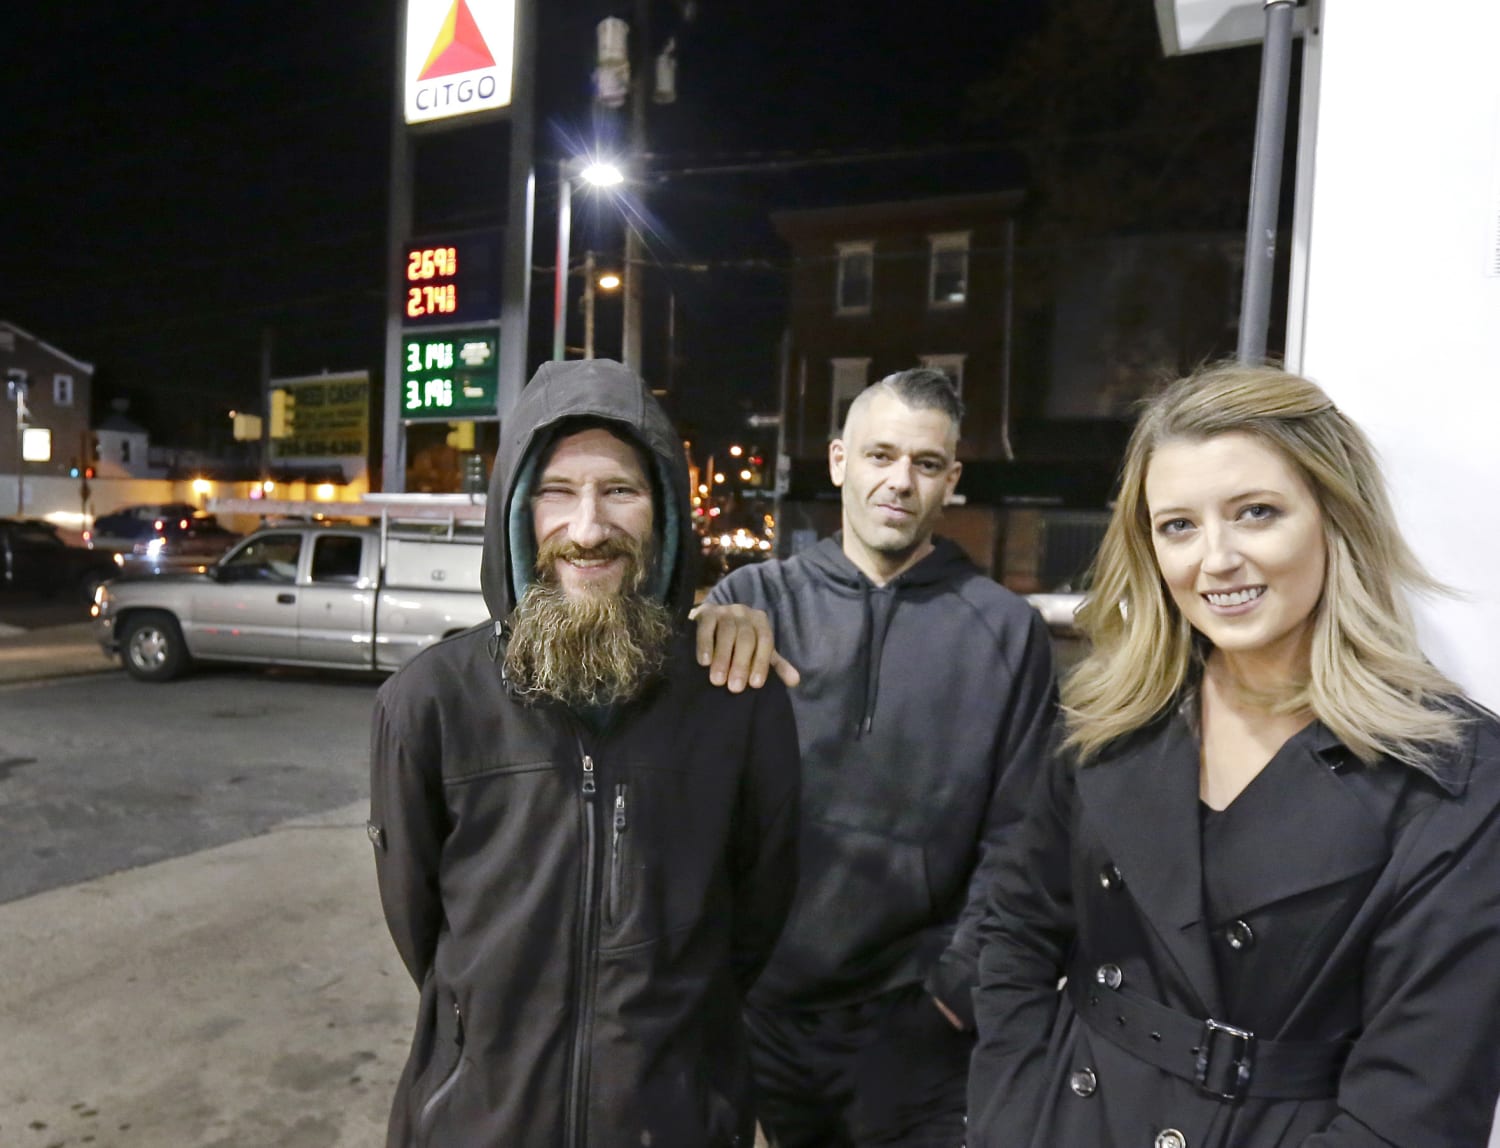 Gofundme Says Donations In Alleged Homeless Scam Fundraiser Returned